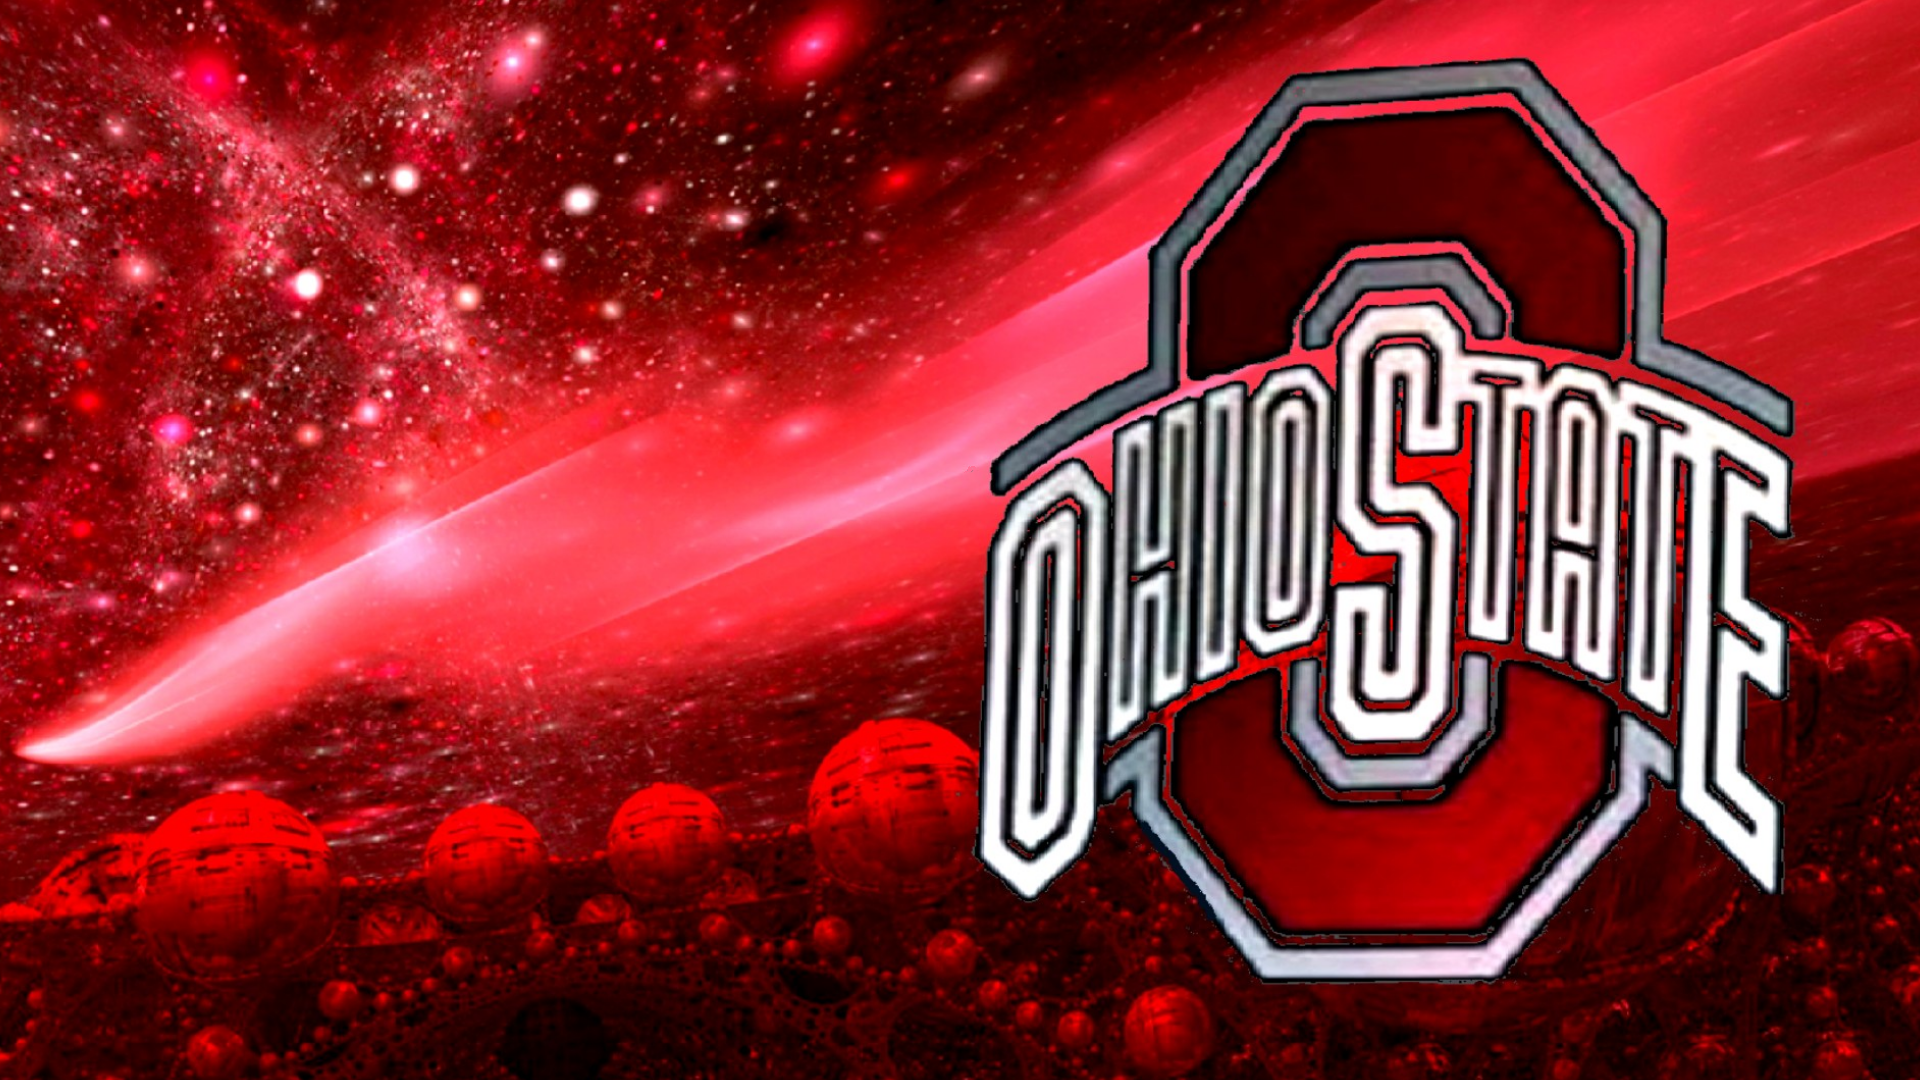  3D   Ohio State Football Desktop and mobile wallpaper Wallippo